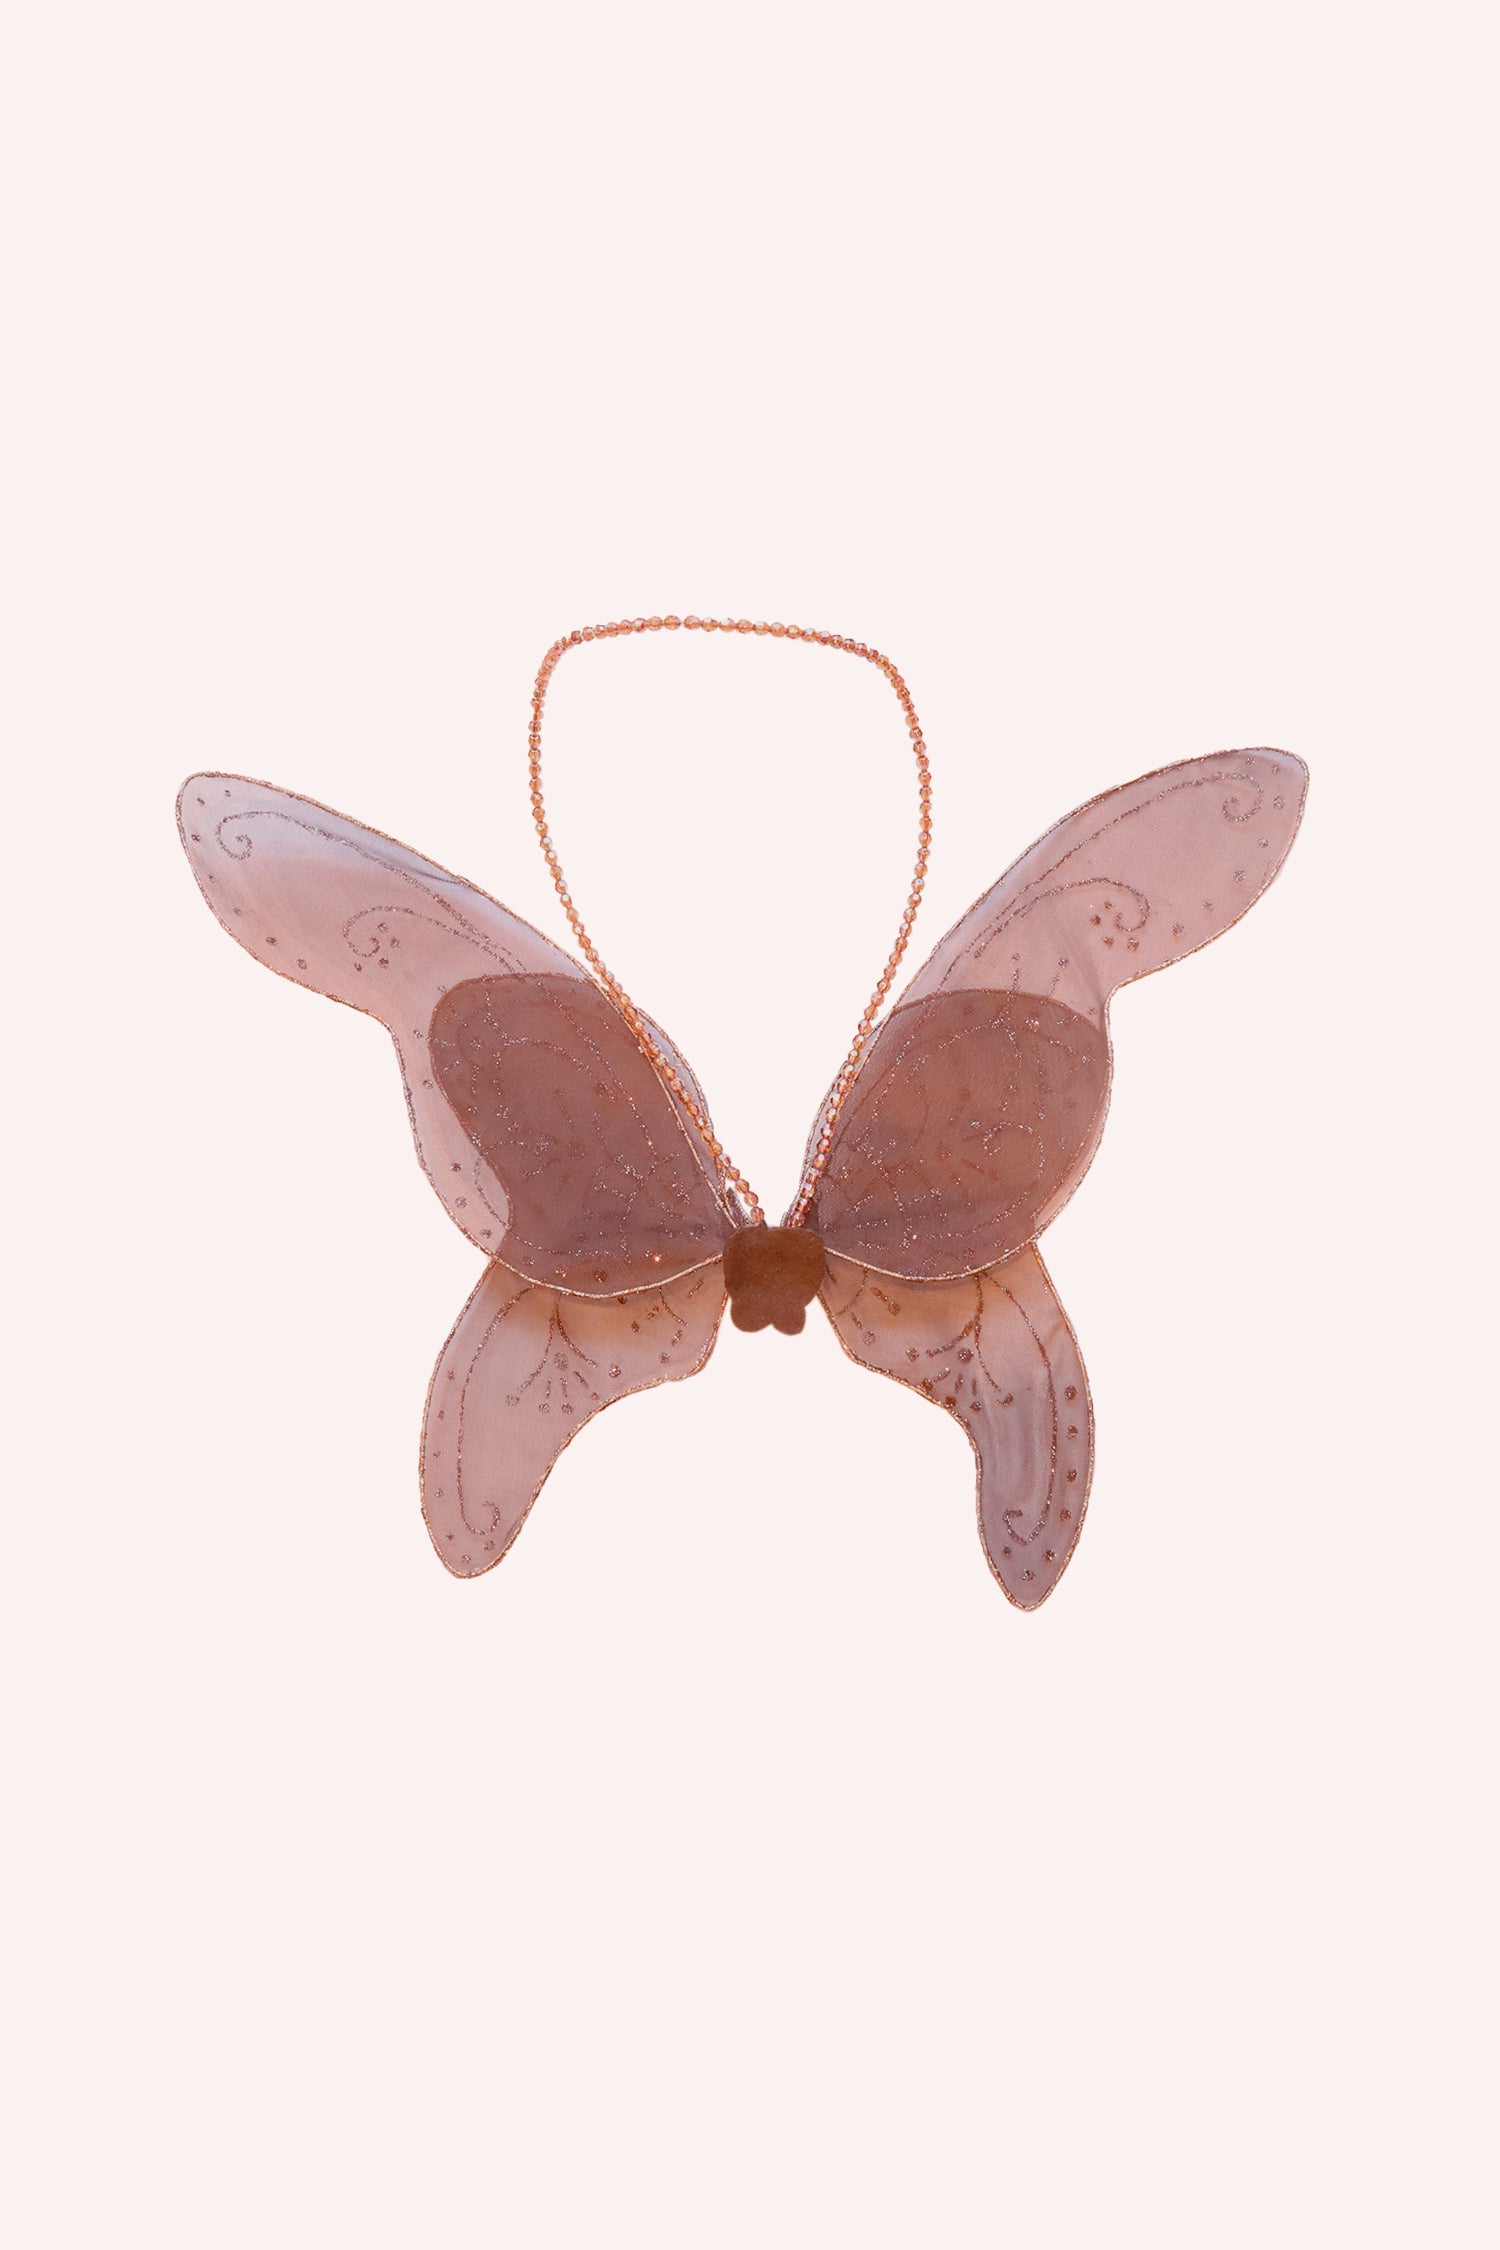 Cocoa with golden floral encrustations, consisting of 2-large, 2-smaller wings at the center